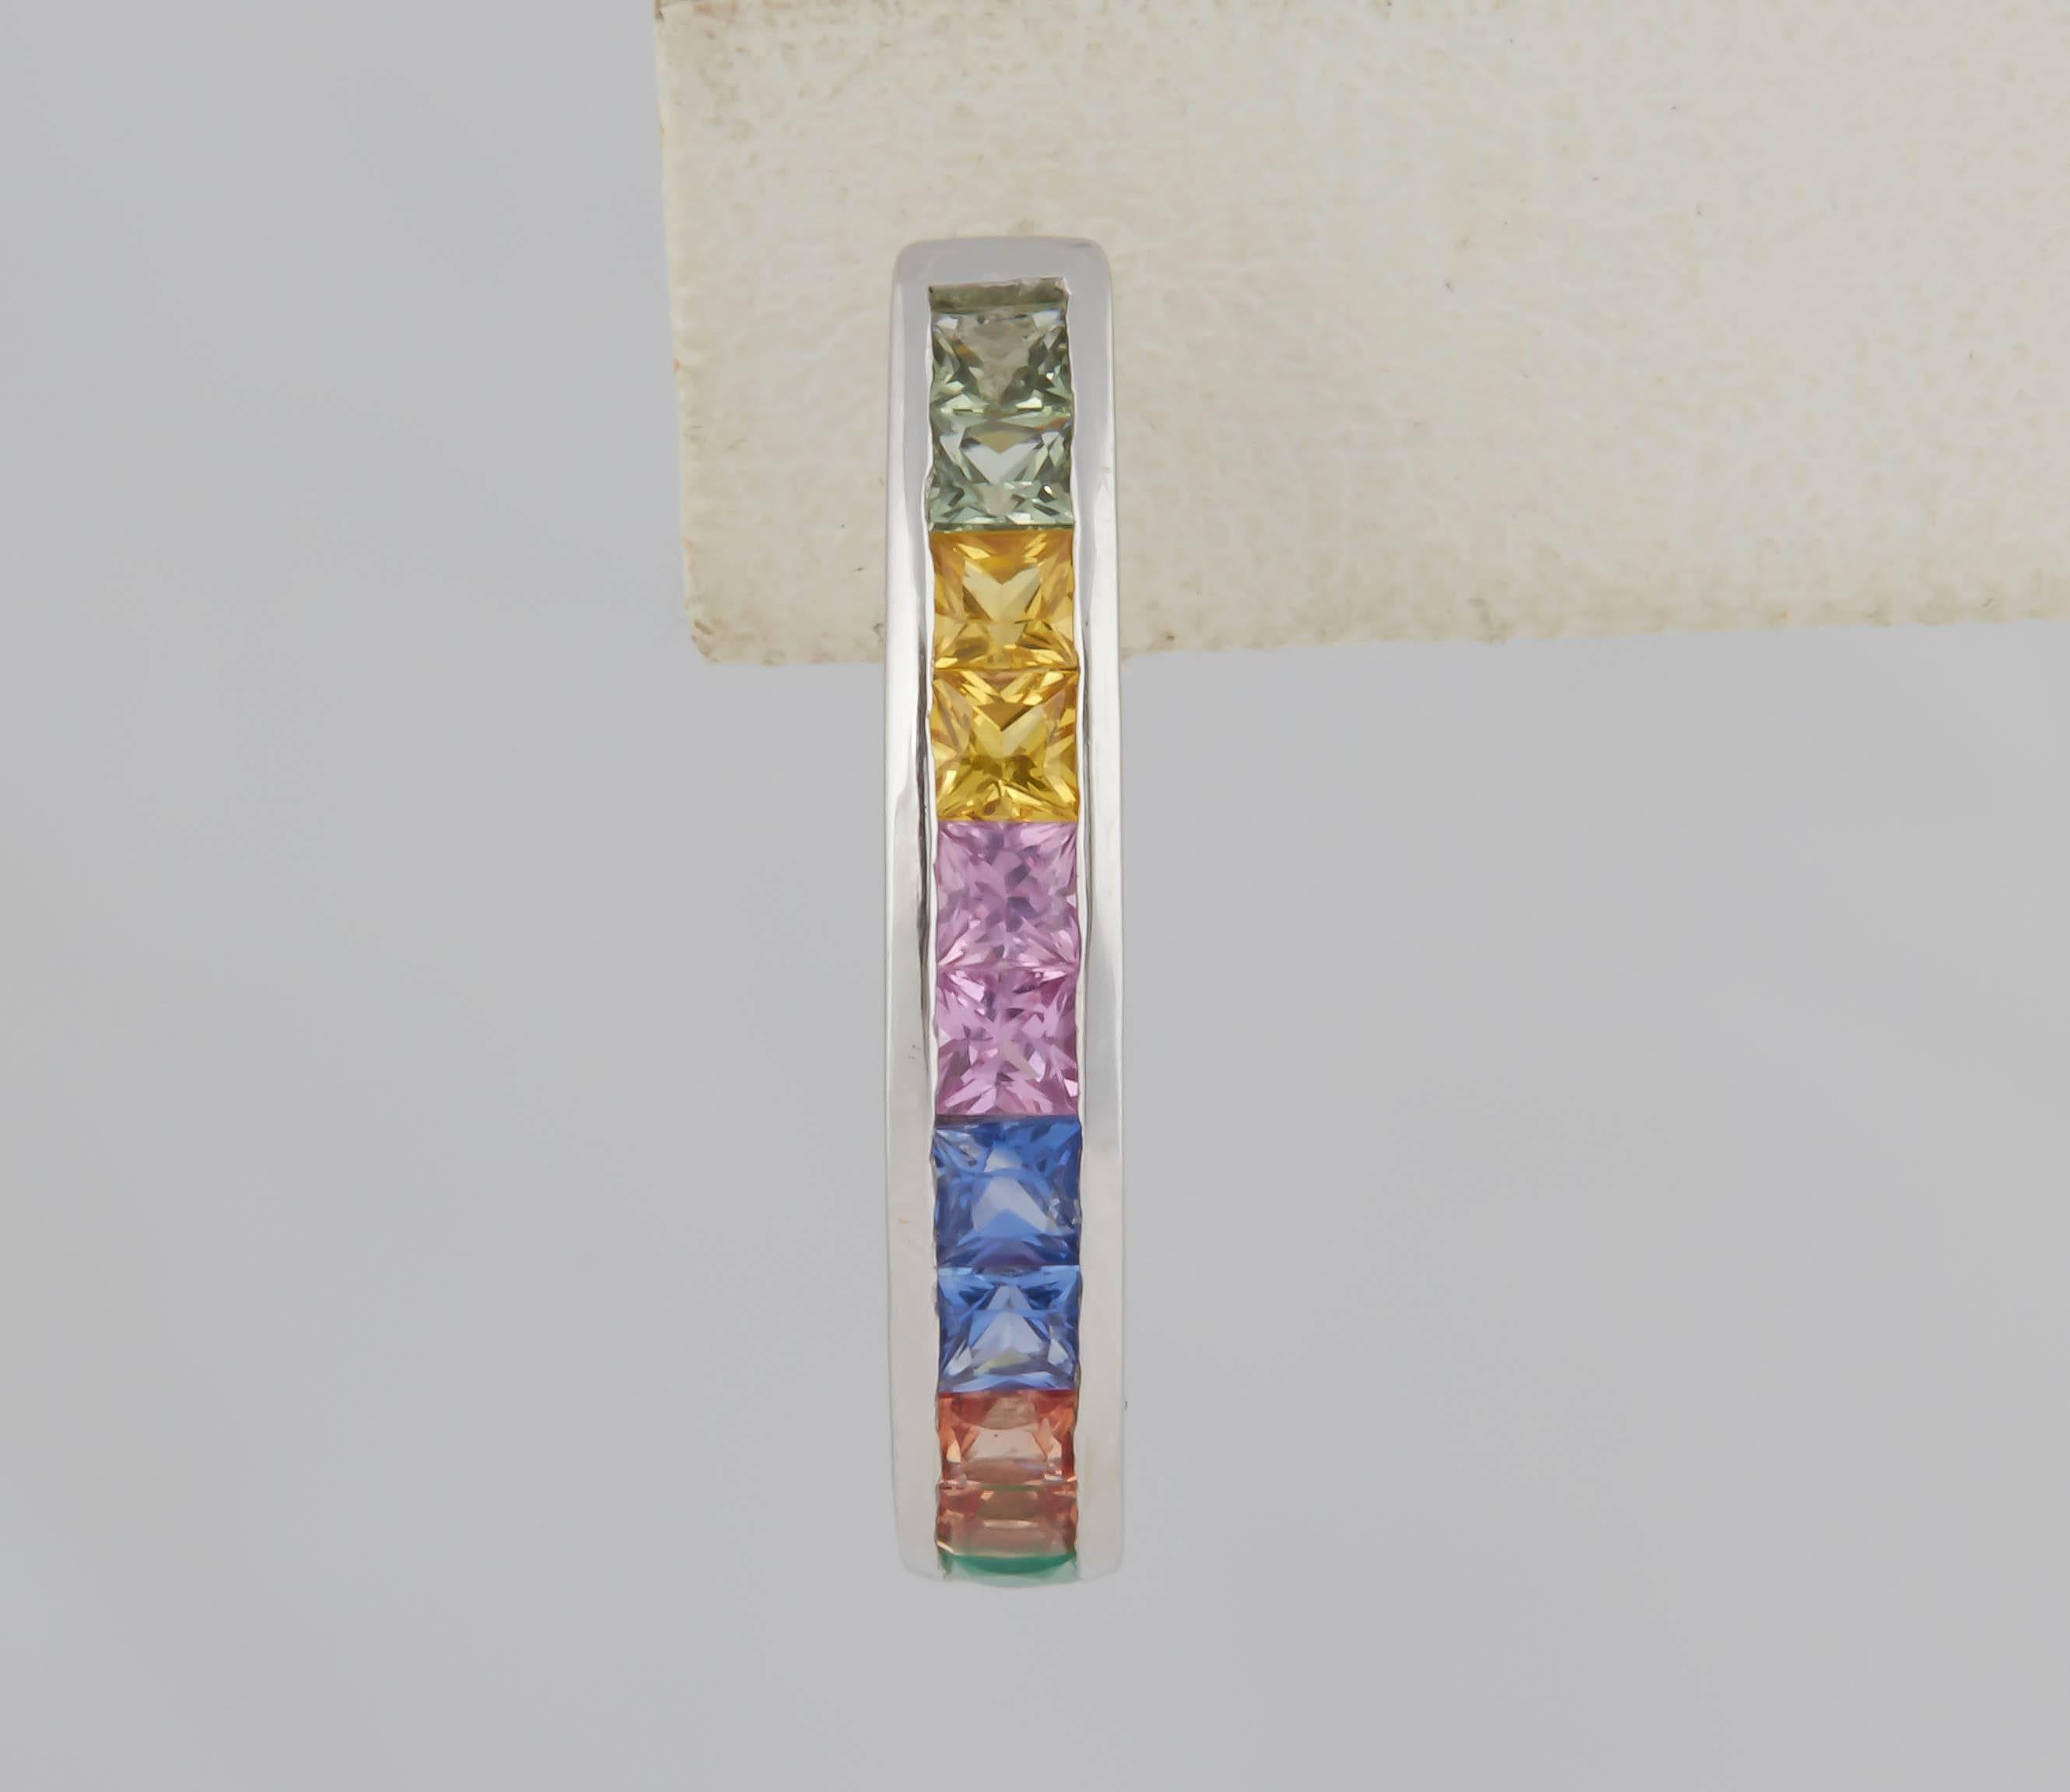 Great looking hoops with green, yellow, pink blue, orange sapphires with the last stone, a green emerald. The square stones are French (or scissor cut) given them extra flash. They are channel set in 14 kt white gold for a sleek and modern look. The